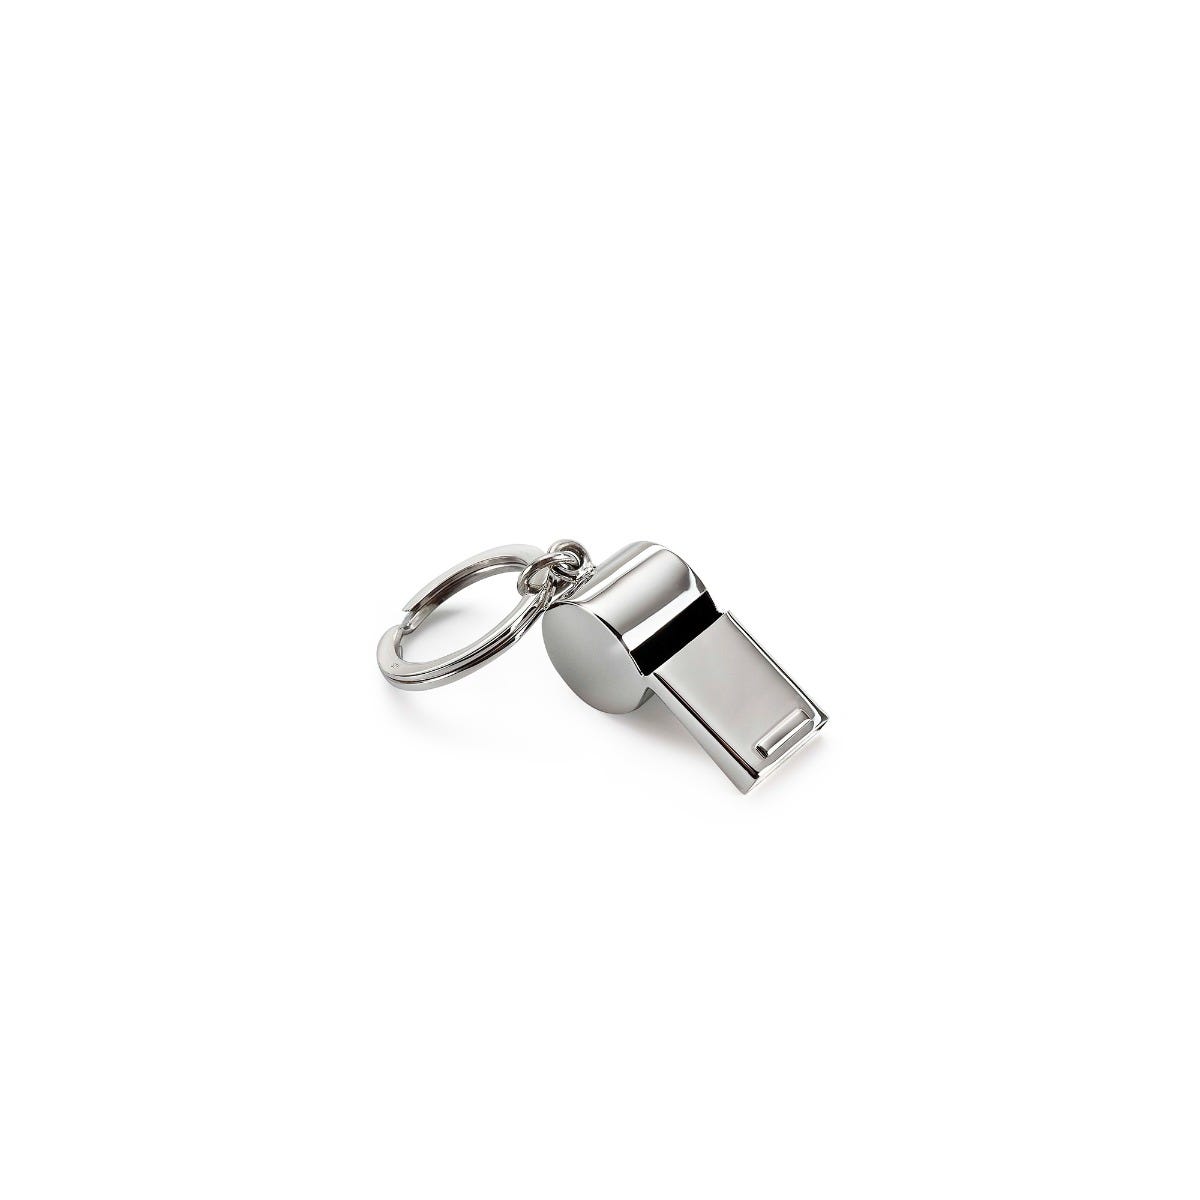 Whistle Key Ring in Sterling Silver